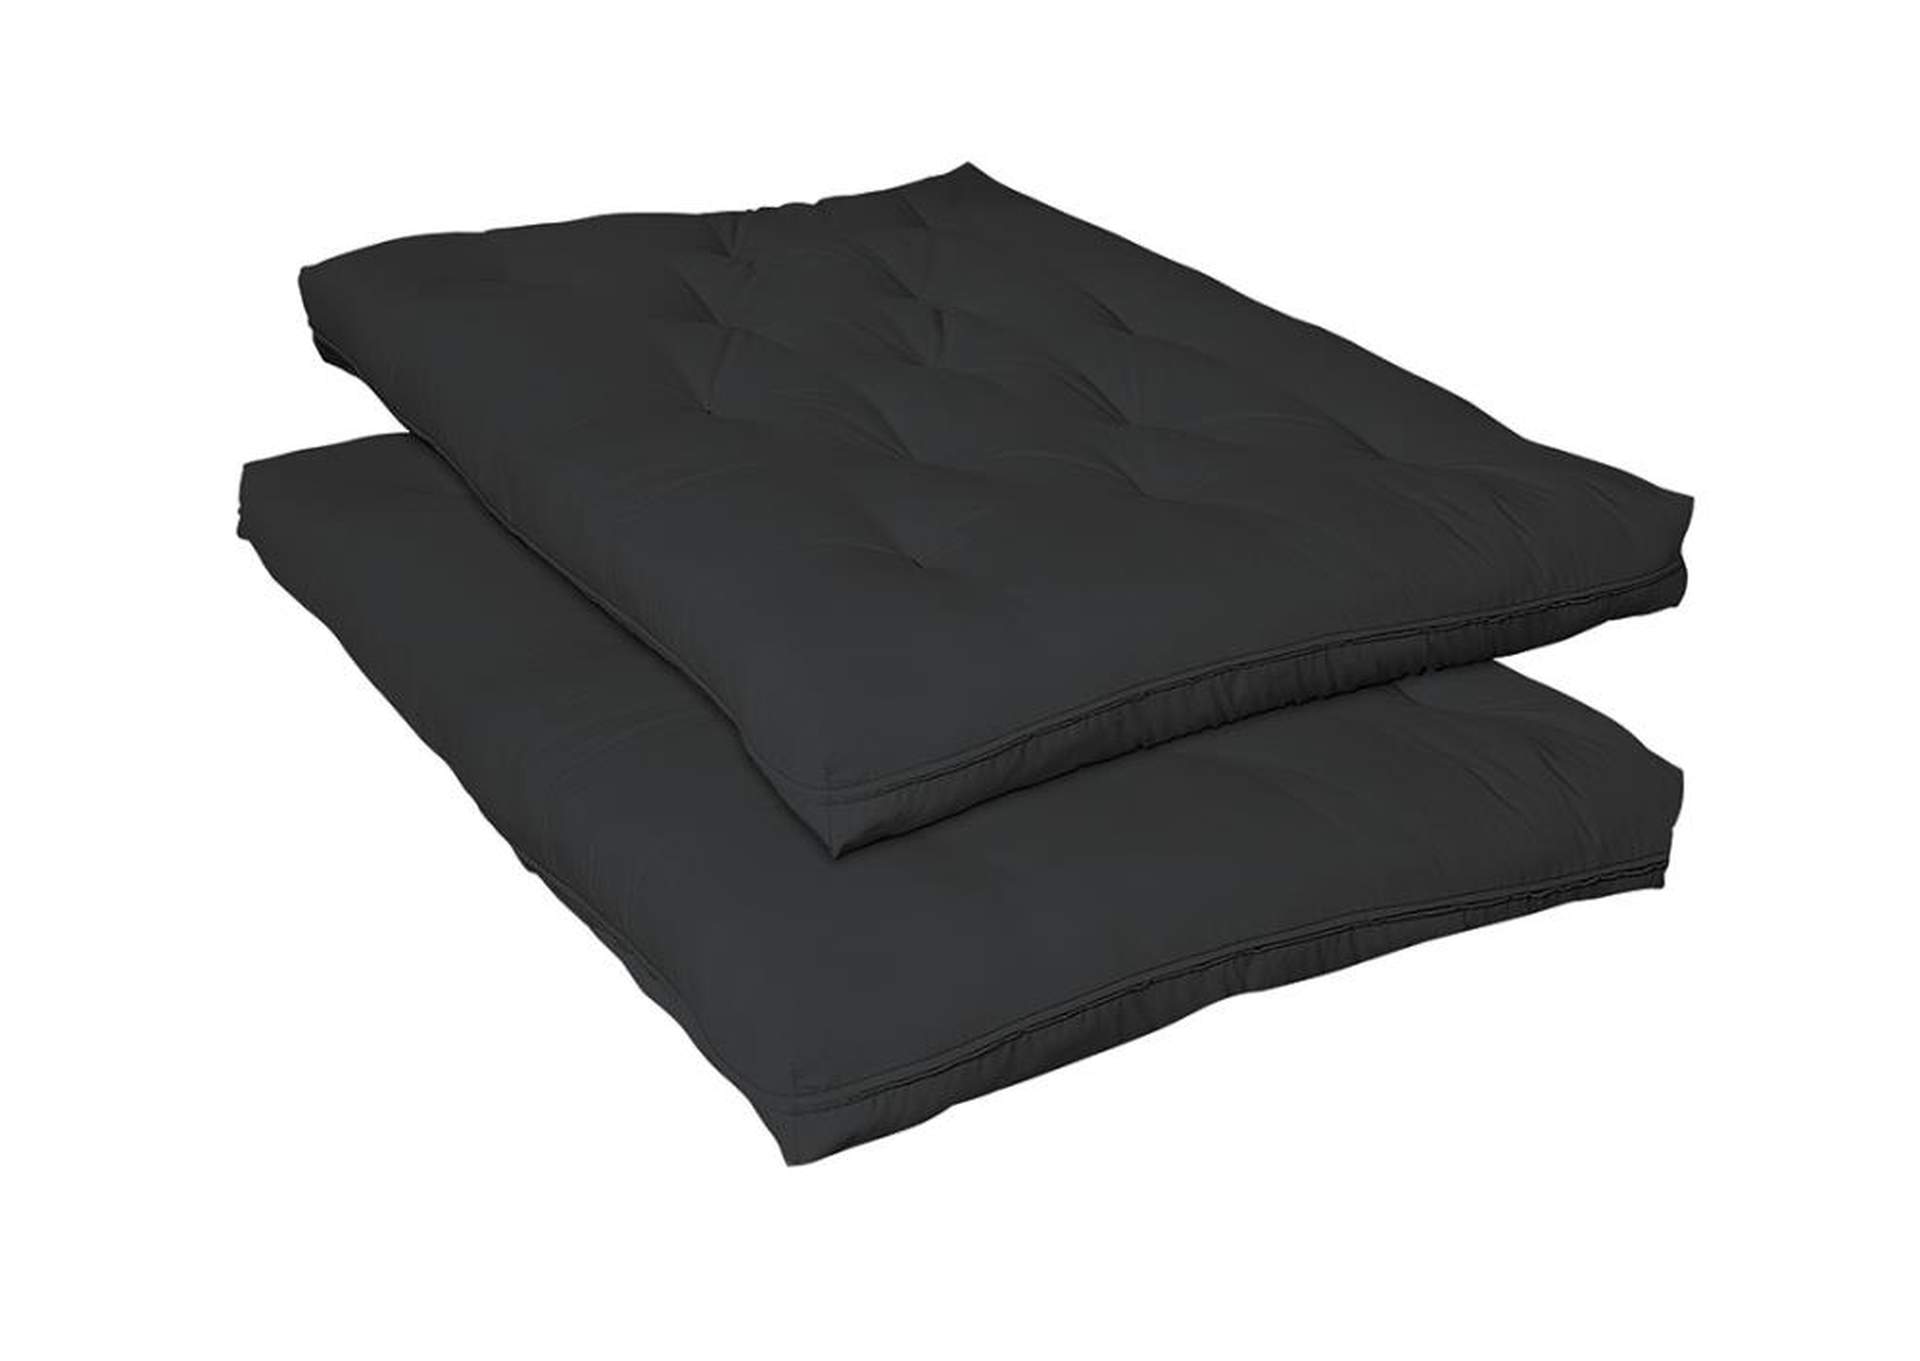 7. 5 Inch Deluxe Innerspring Futon Pad Black,Coaster Furniture